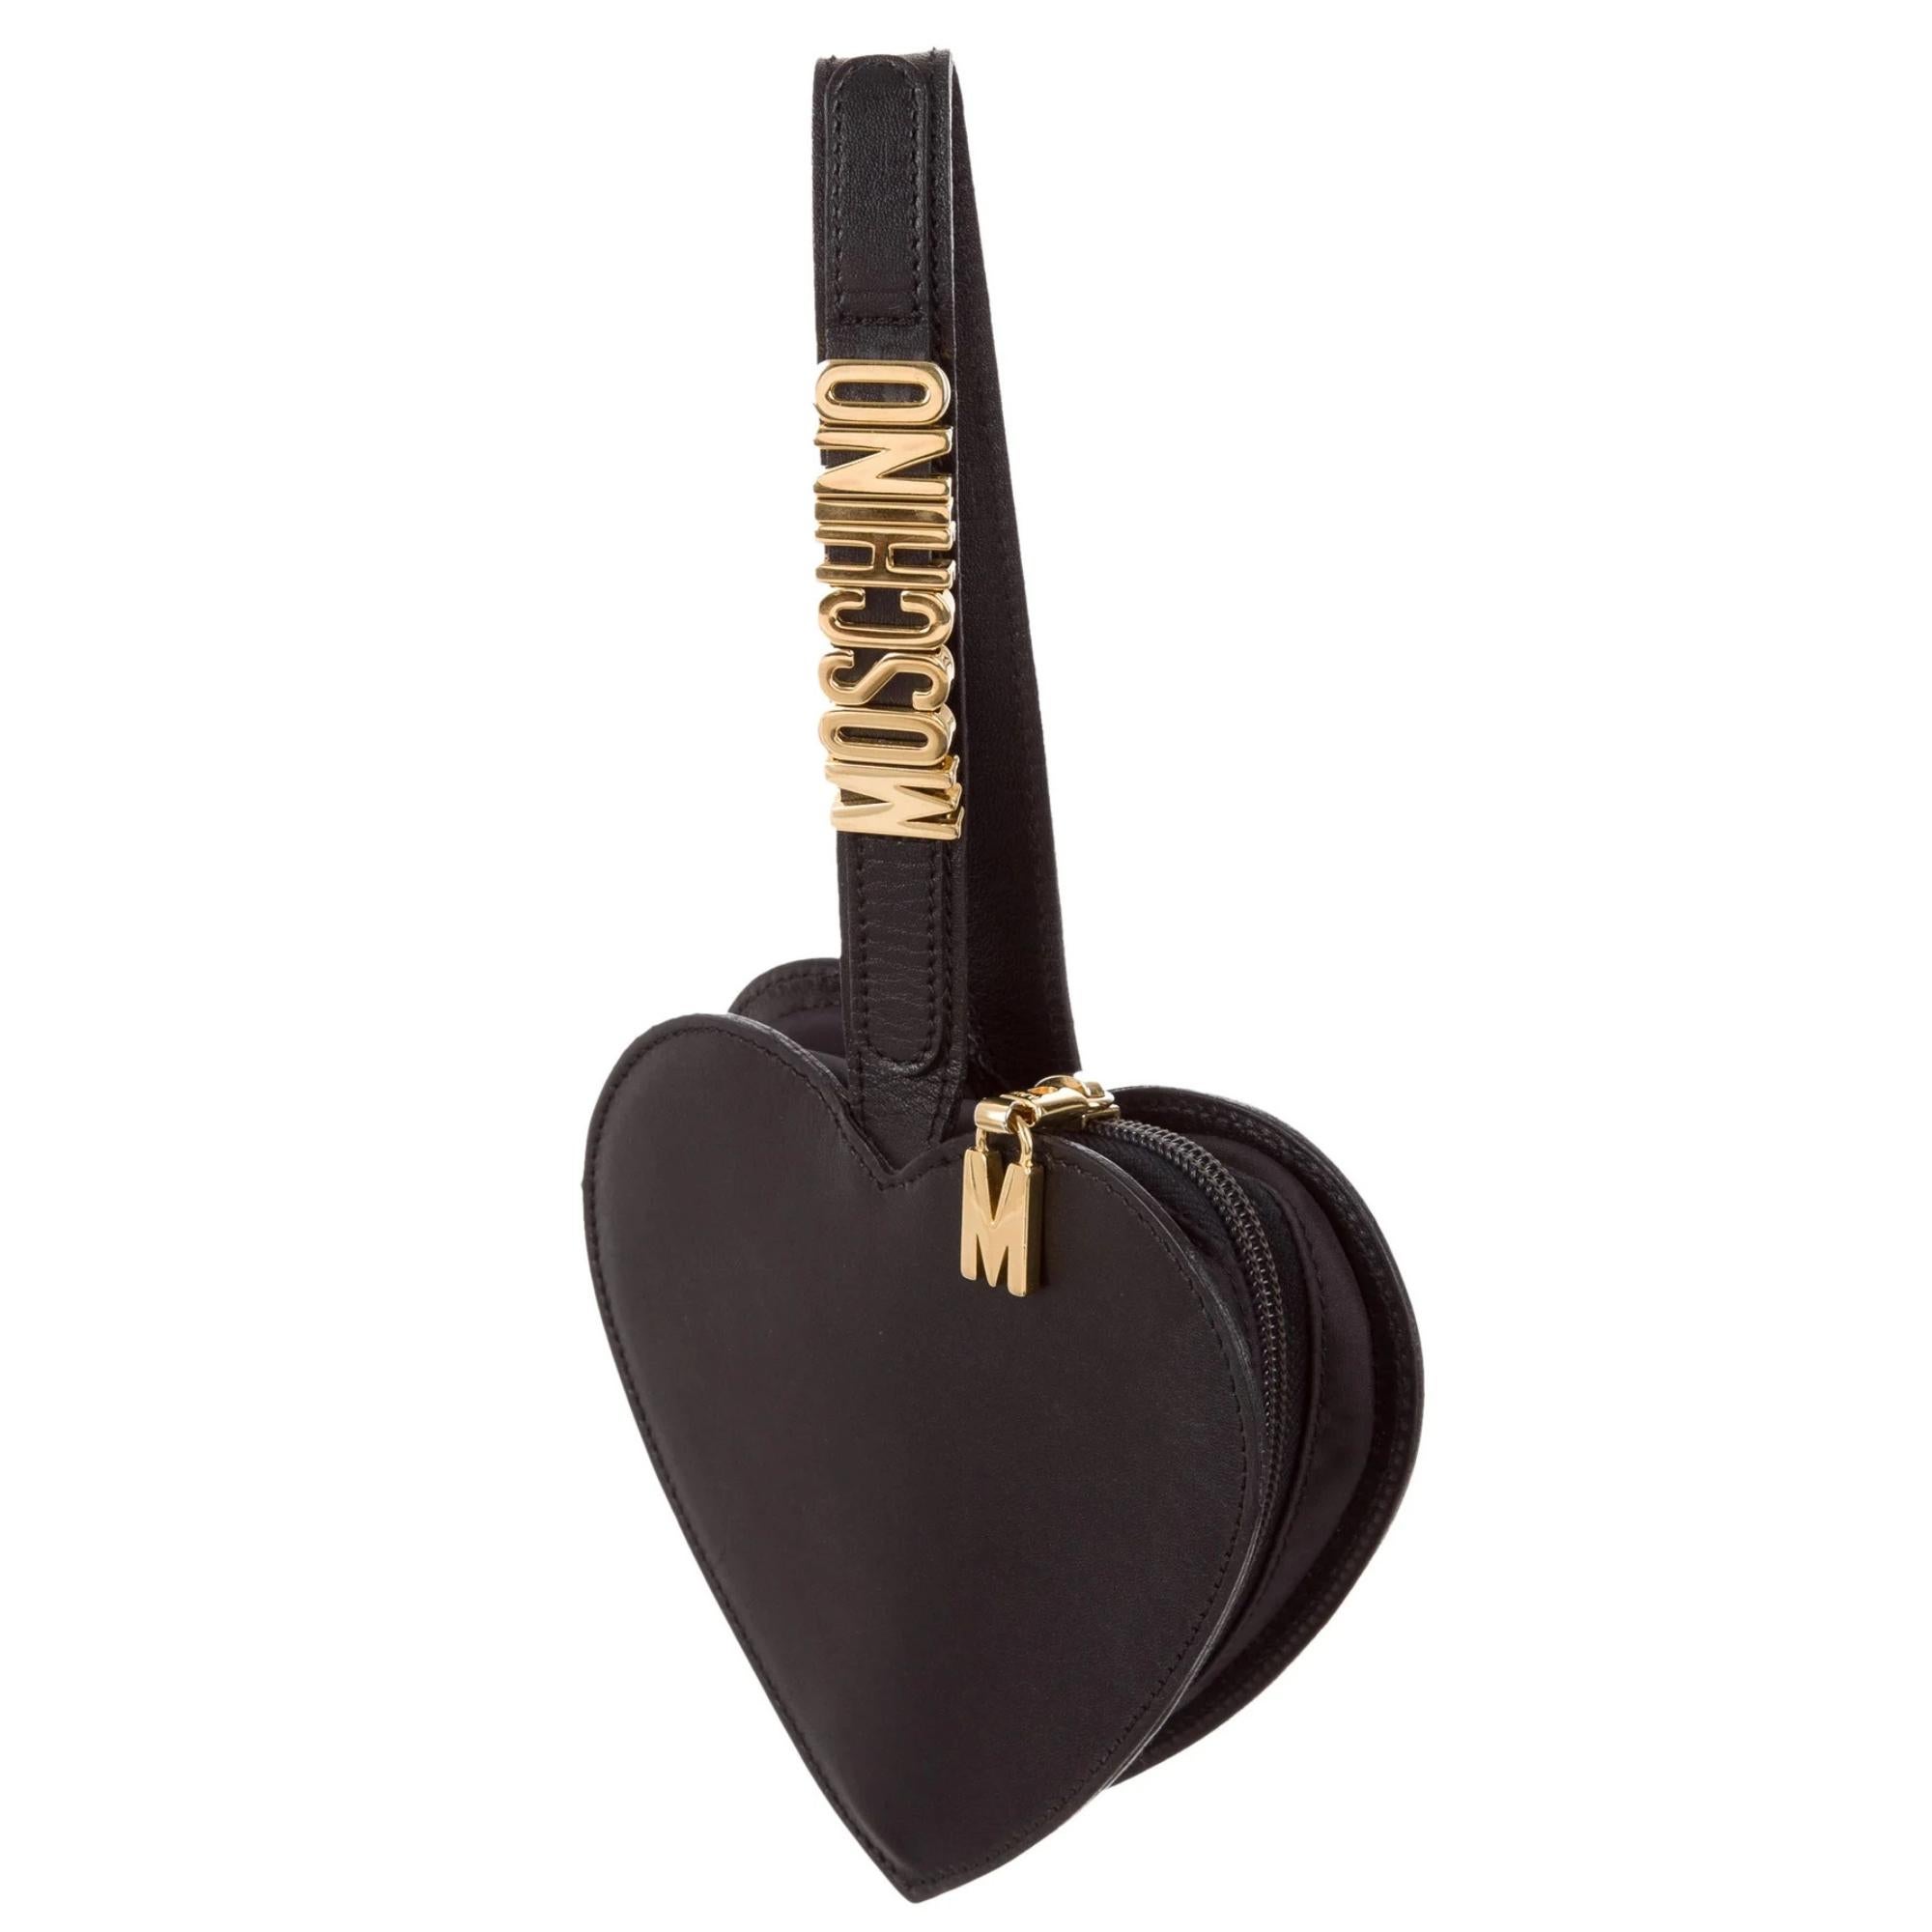 Moschino Black Heart Wristlet Mini Bag In Good Condition For Sale In Montreal, Quebec